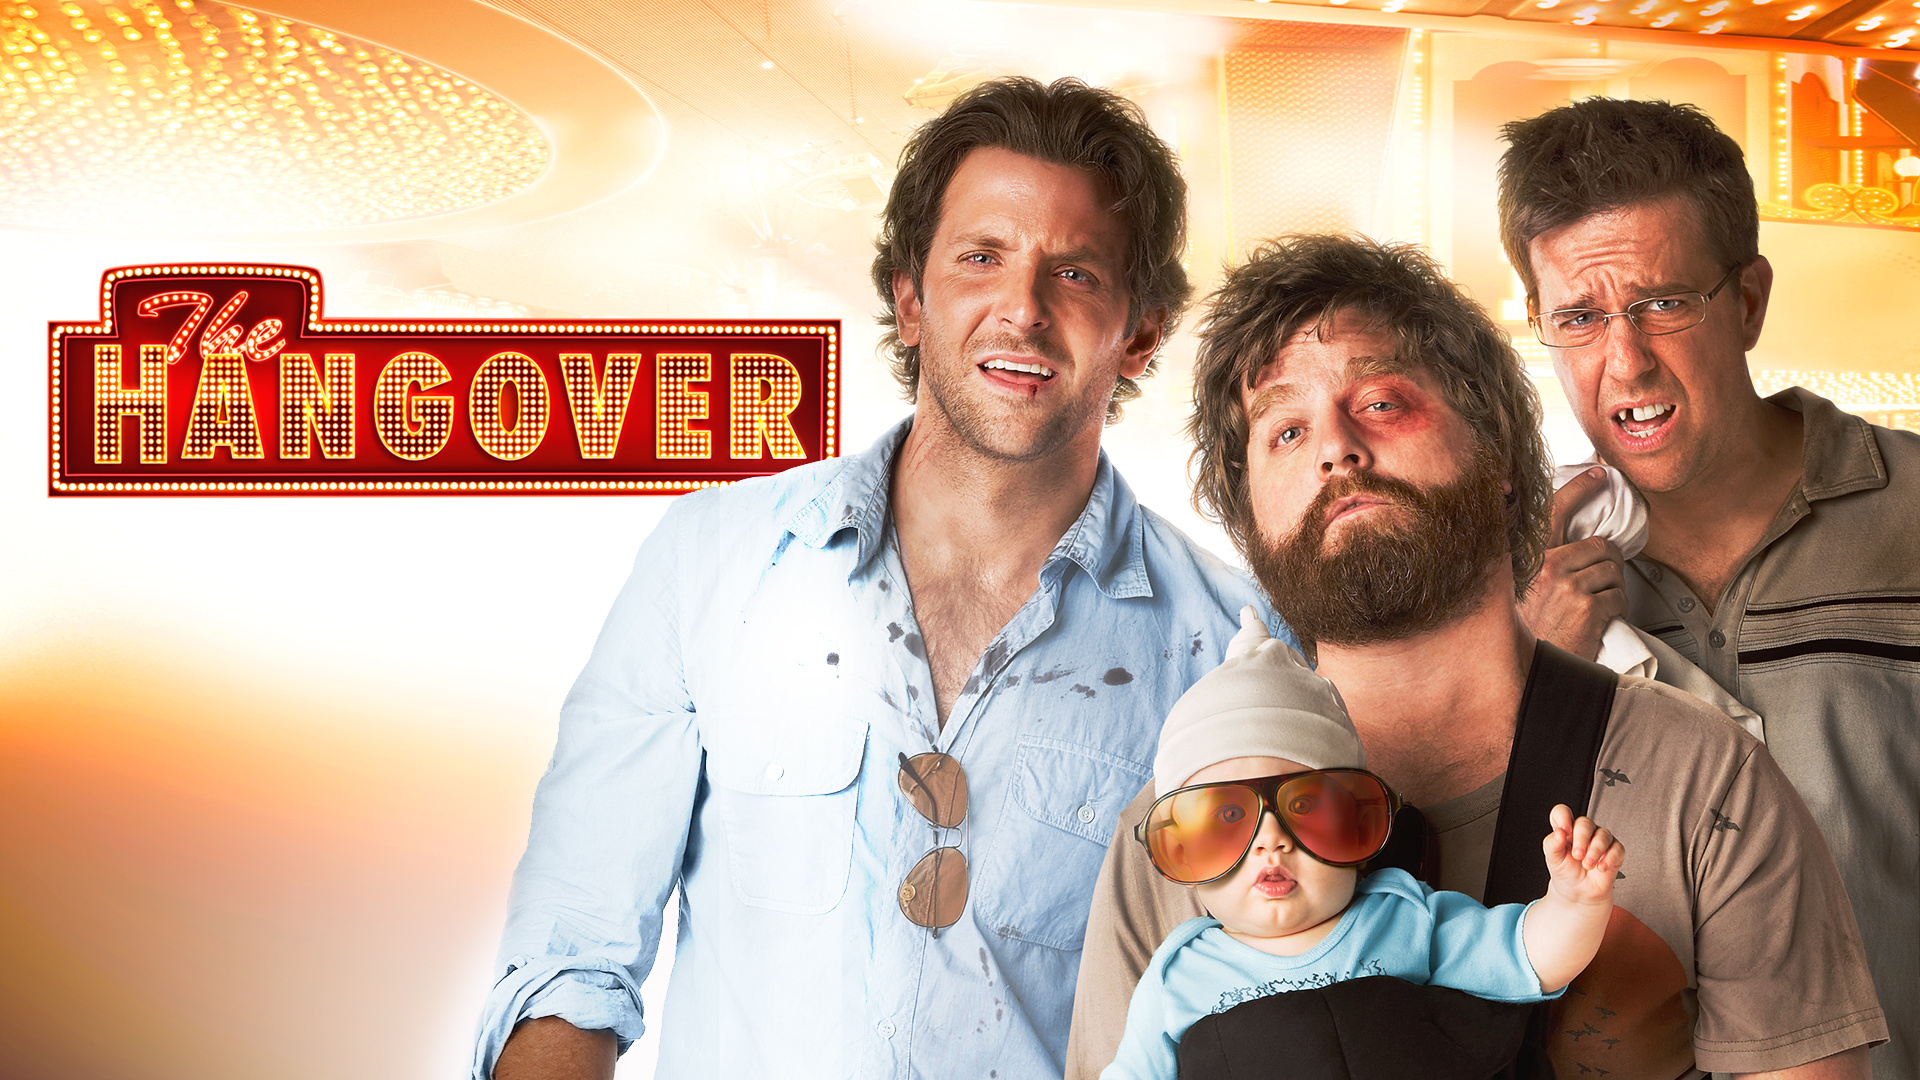 The Hangover: The tenth-highest-grossing film of 2009, with a worldwide gross of over $467 million. 1920x1080 Full HD Background.